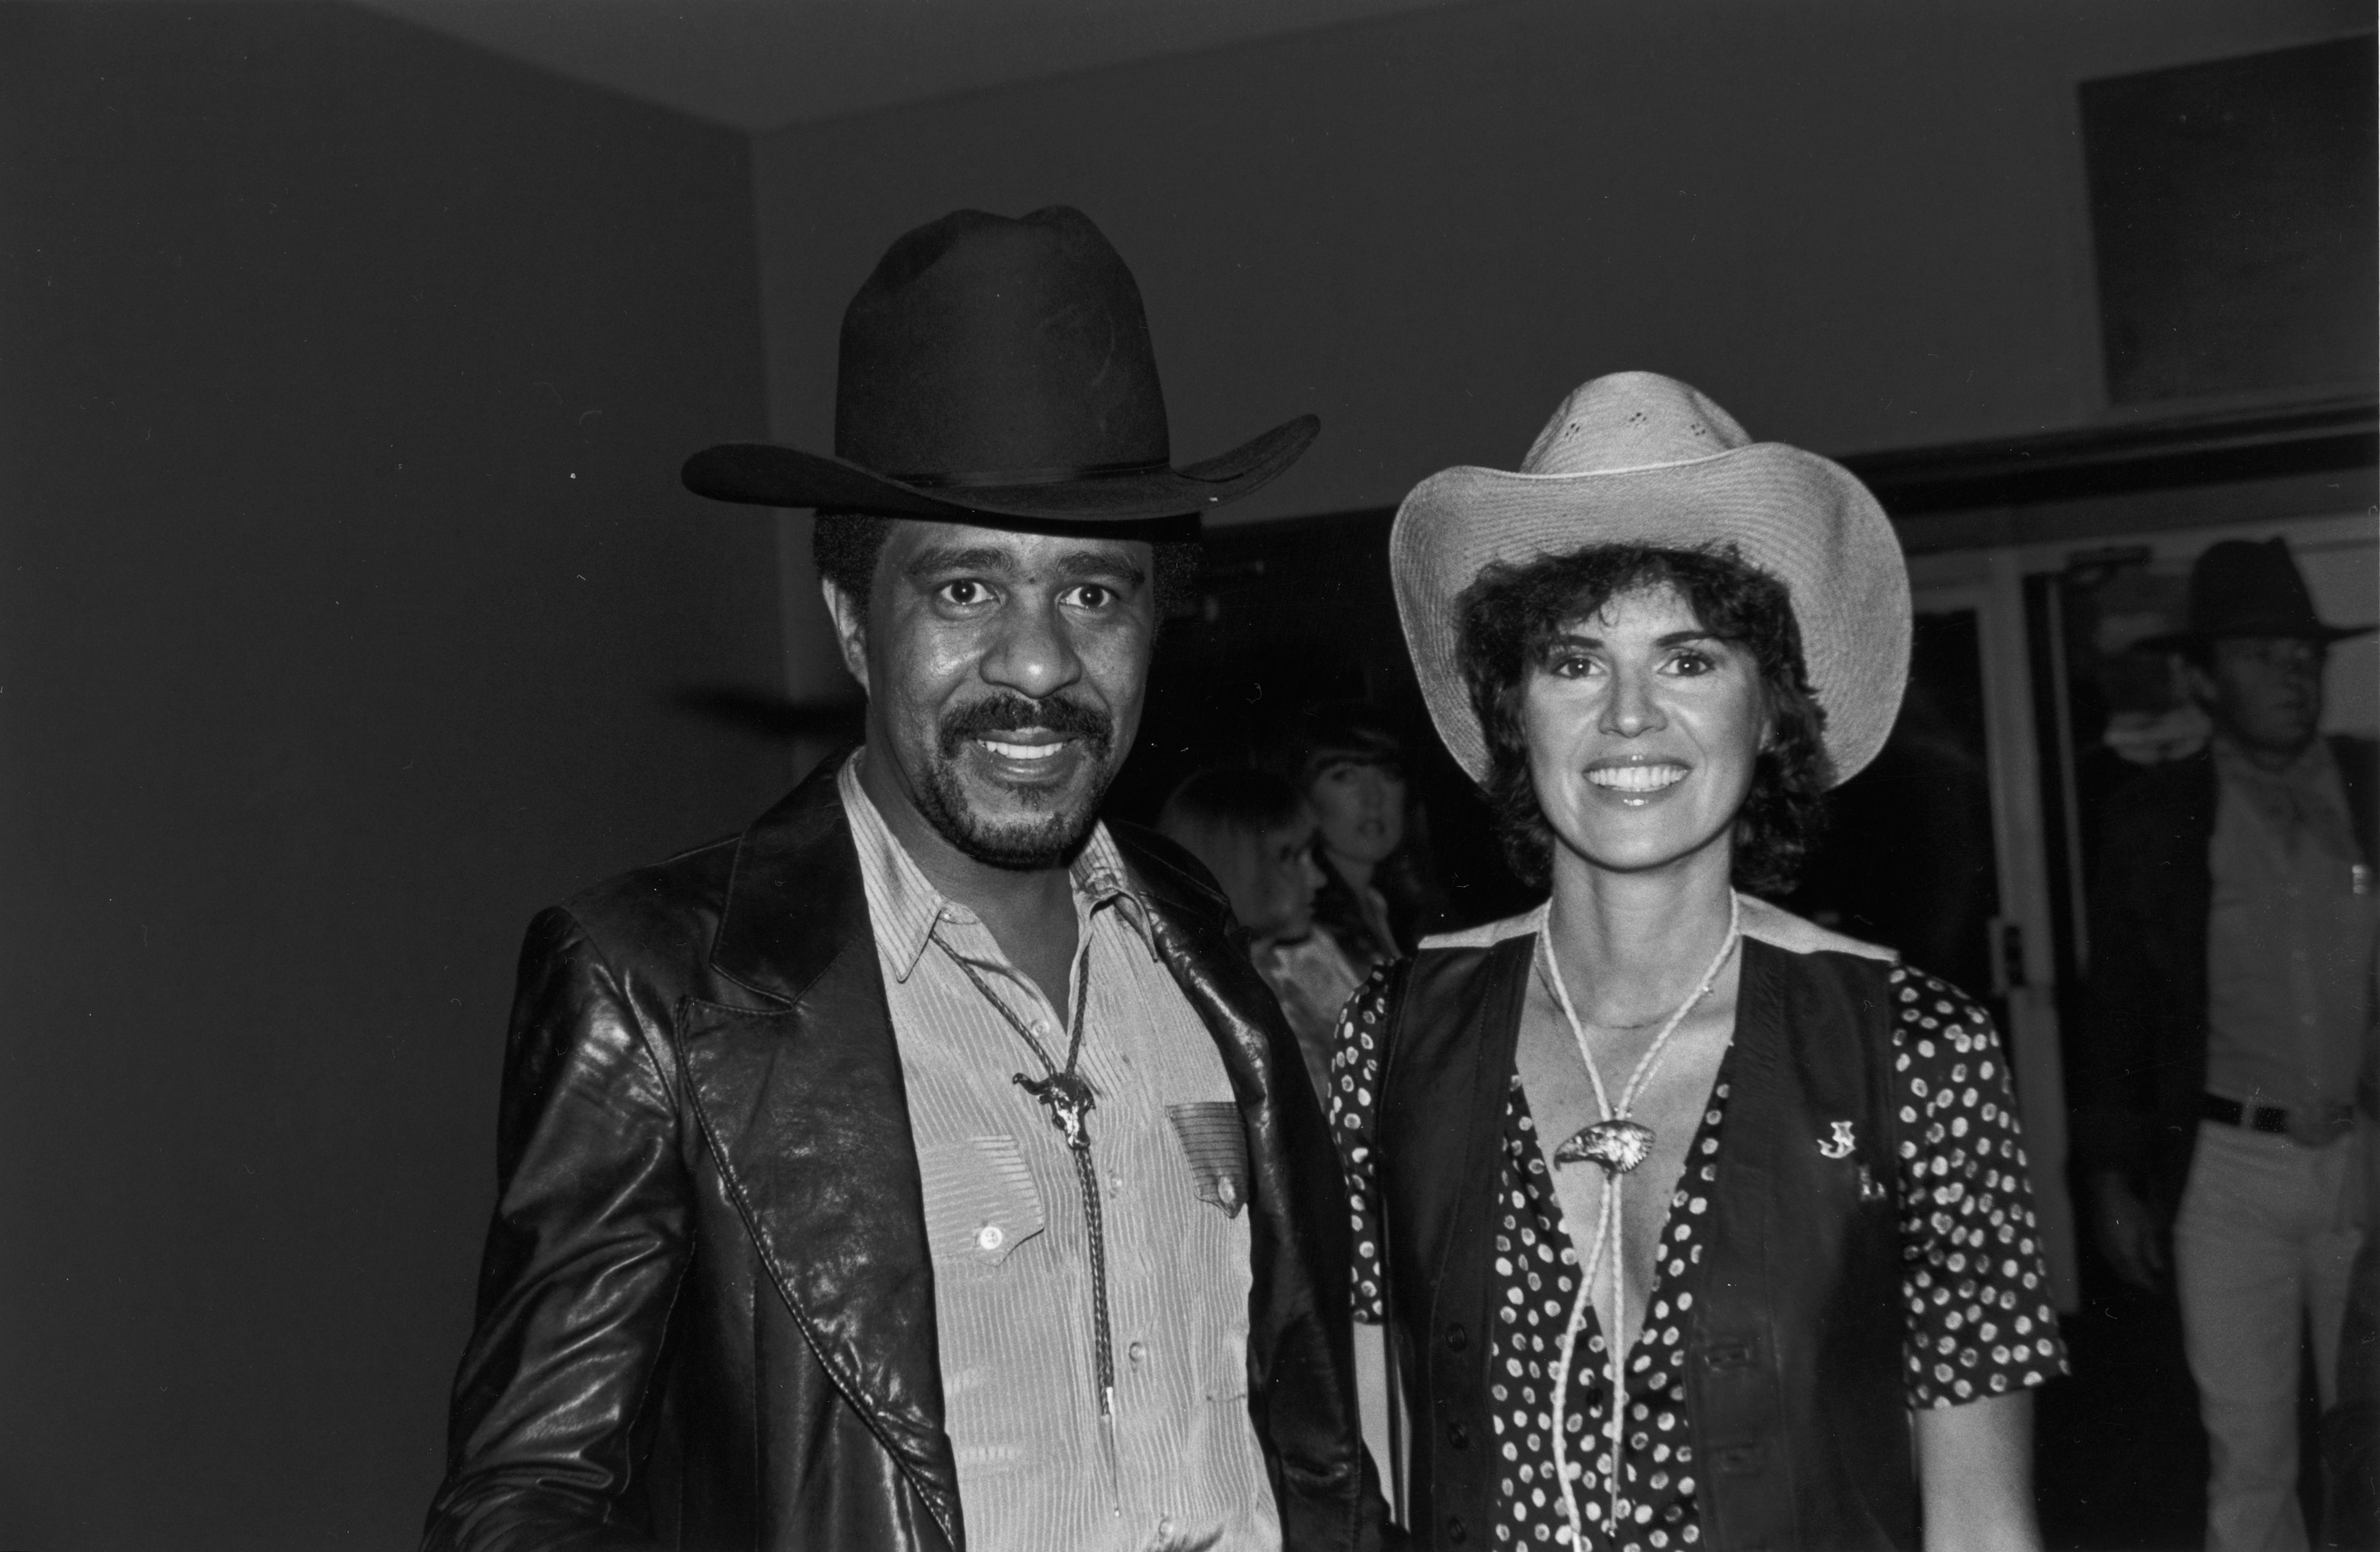 Richard Pryor and Jennifer Lee wearing cowboy hats and bolo ties, smile while at the annual SHARE party, held at the Hollywood Palladium, Hollywood, California. | Source: Getty Images